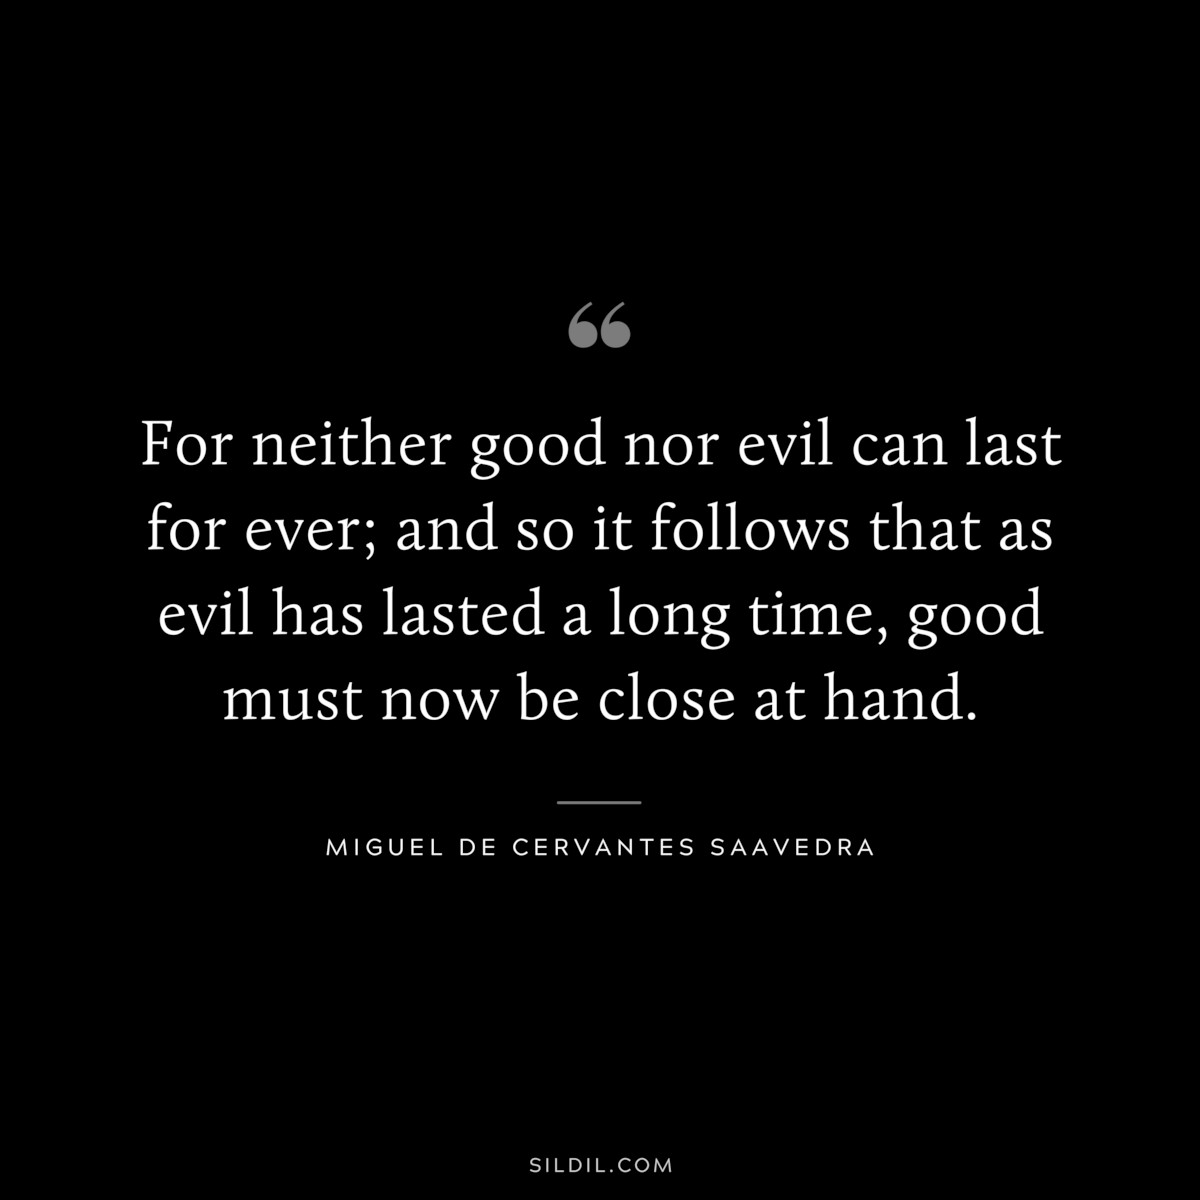 For neither good nor evil can last for ever; and so it follows that as evil has lasted a long time, good must now be close at hand. ― Miguel de Cervantes Saavedra